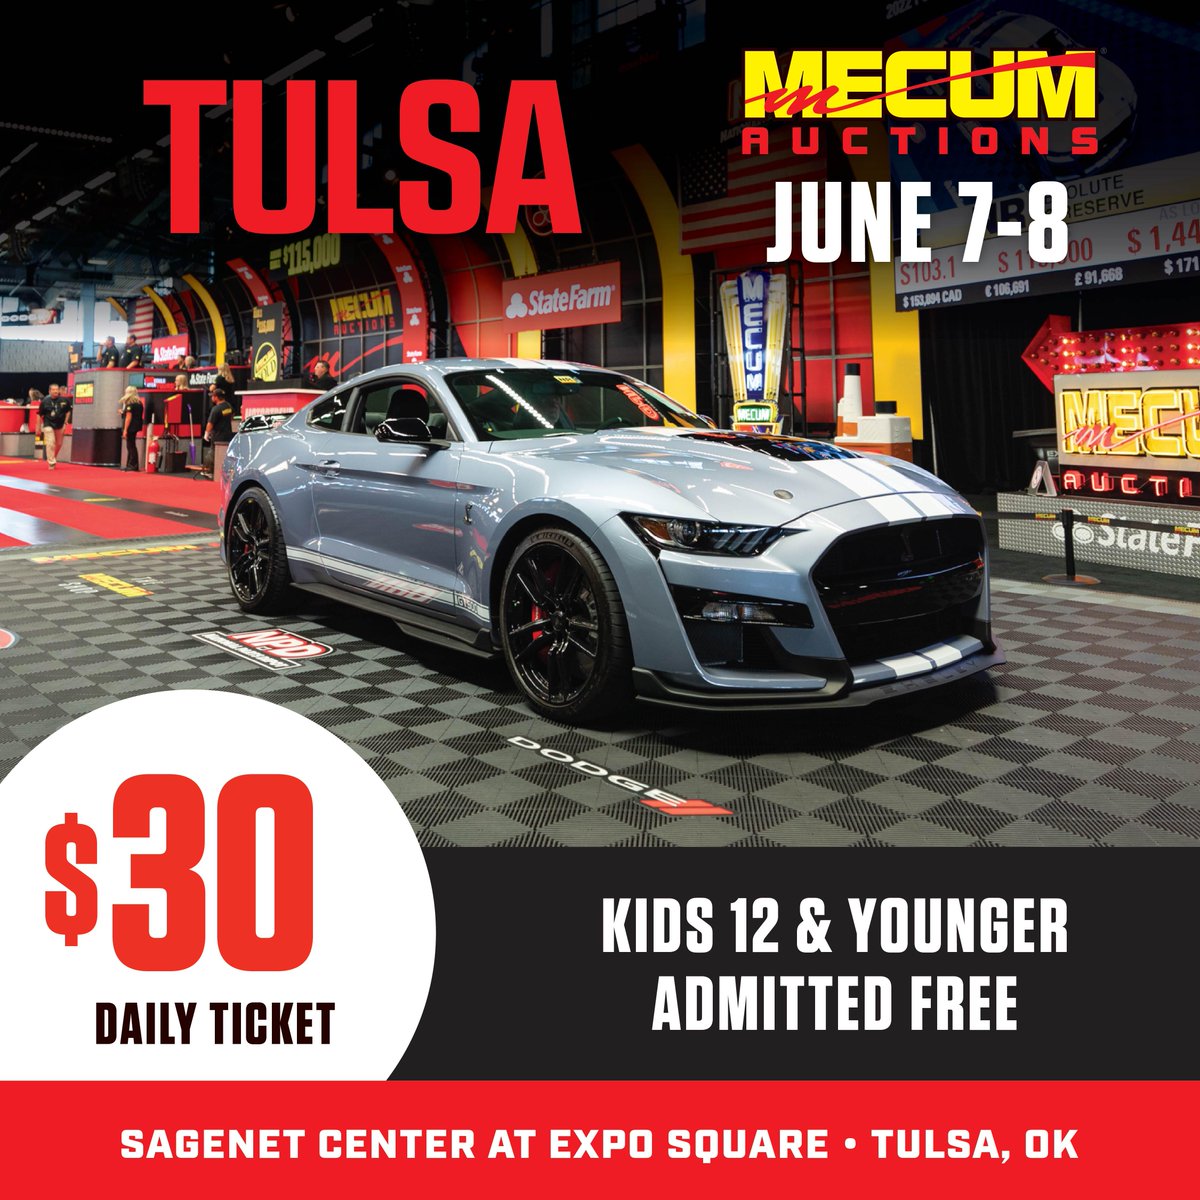 Tulsa we are heading your way! Make sure to snag your tickets to see some AMAZING vehicles! 
 
▪️Tickets: bit.ly/3WNYvsR

#MecumTulsa #Mecum #MecumAuctions #WhereTheCarsAre #MecumOnMotorTrend